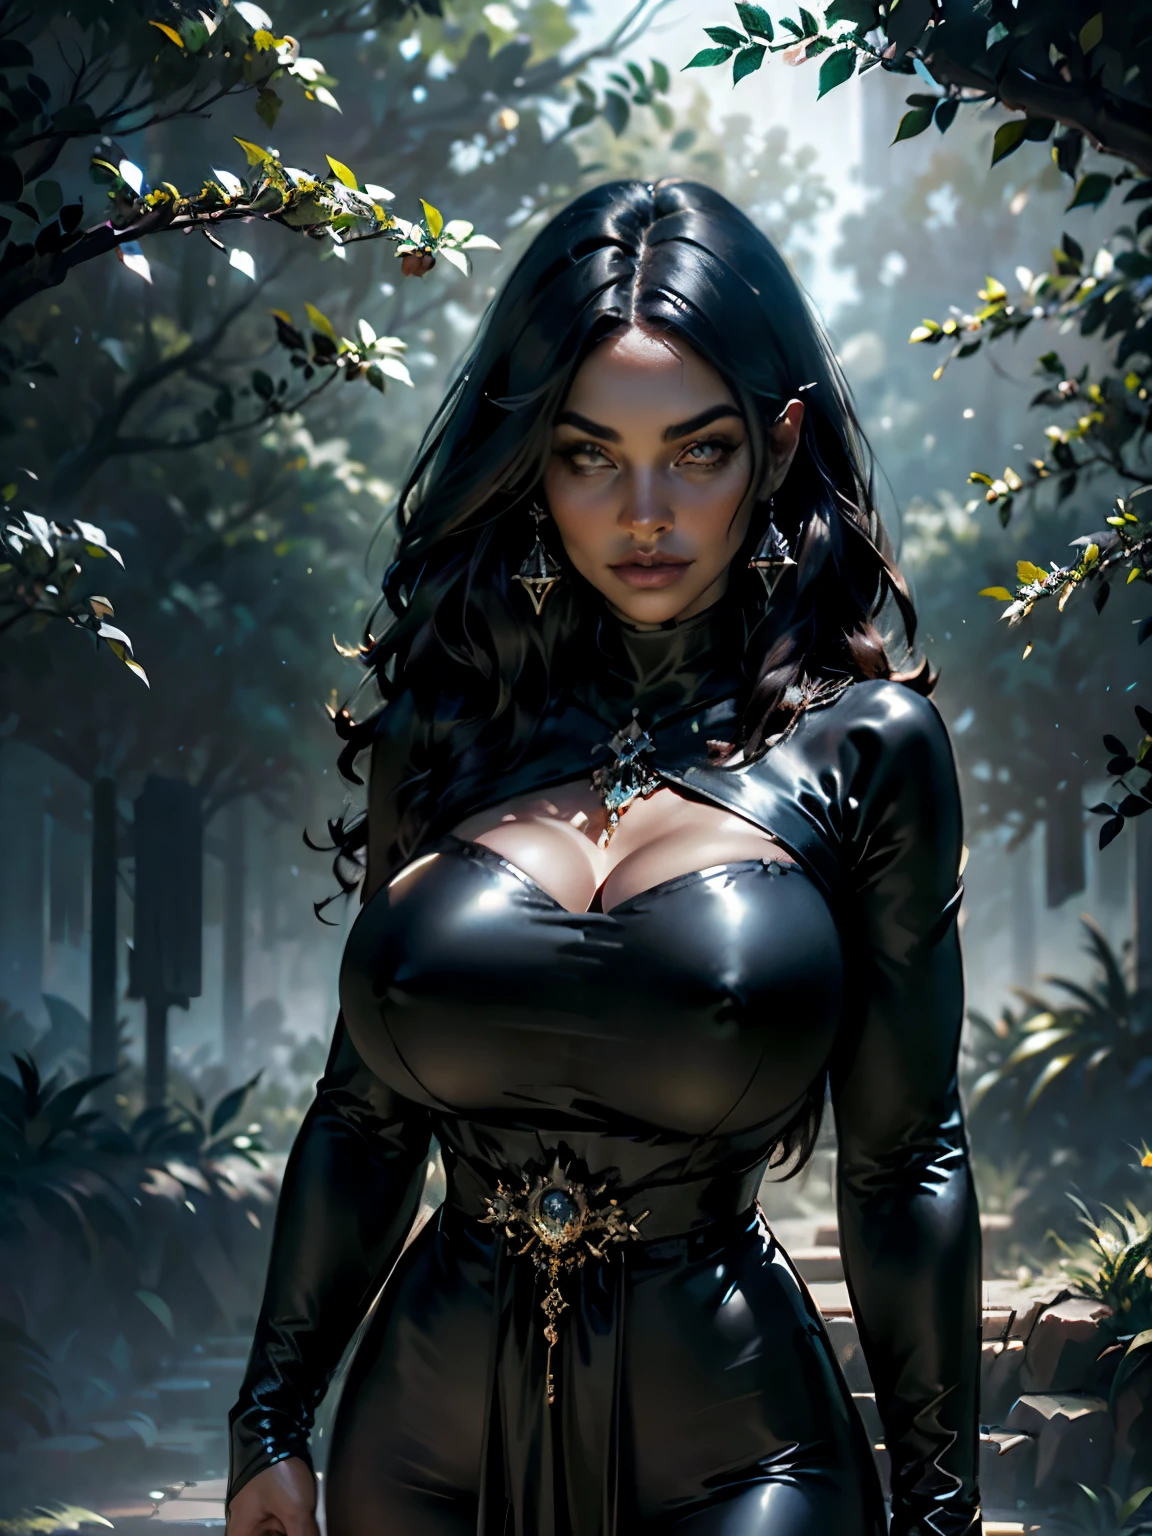 ((17-year-old))), negro. girl, (((Dark skin))), (((full body pose))), (((long curly negro hair))), (((Wear tight chainmail micro miniskirt, chain mail bra, Open front layer, Alas))), (((seamless, negro, shackles))), standing in the dark forest at night, Moonlight shining through the dense canopy, (((Dark castle in the background))), dark fantasy, RICO, deep colors, (intricate details:0.9), (HDR, Hyperdetail:1.2), (Natural skin textures, hyperrealistic, glowing skin, Luz outfit, sharp),